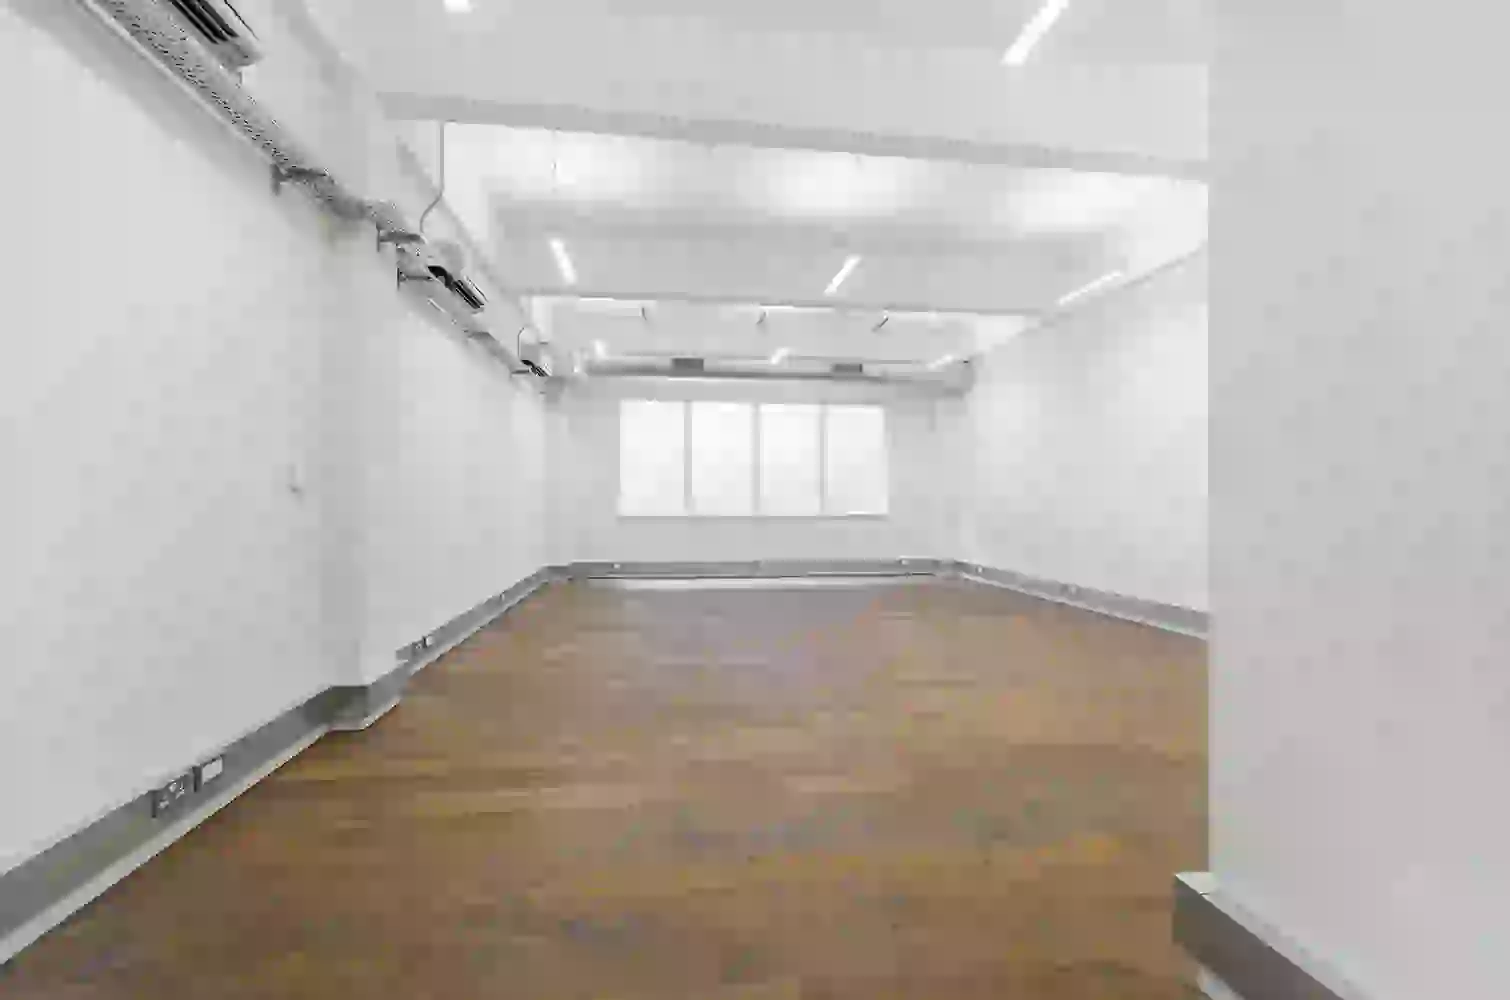 Office space to rent at The Record Hall, 16-16A Baldwins Gardens, London, unit RH.G05, 608 sq ft (56 sq m).